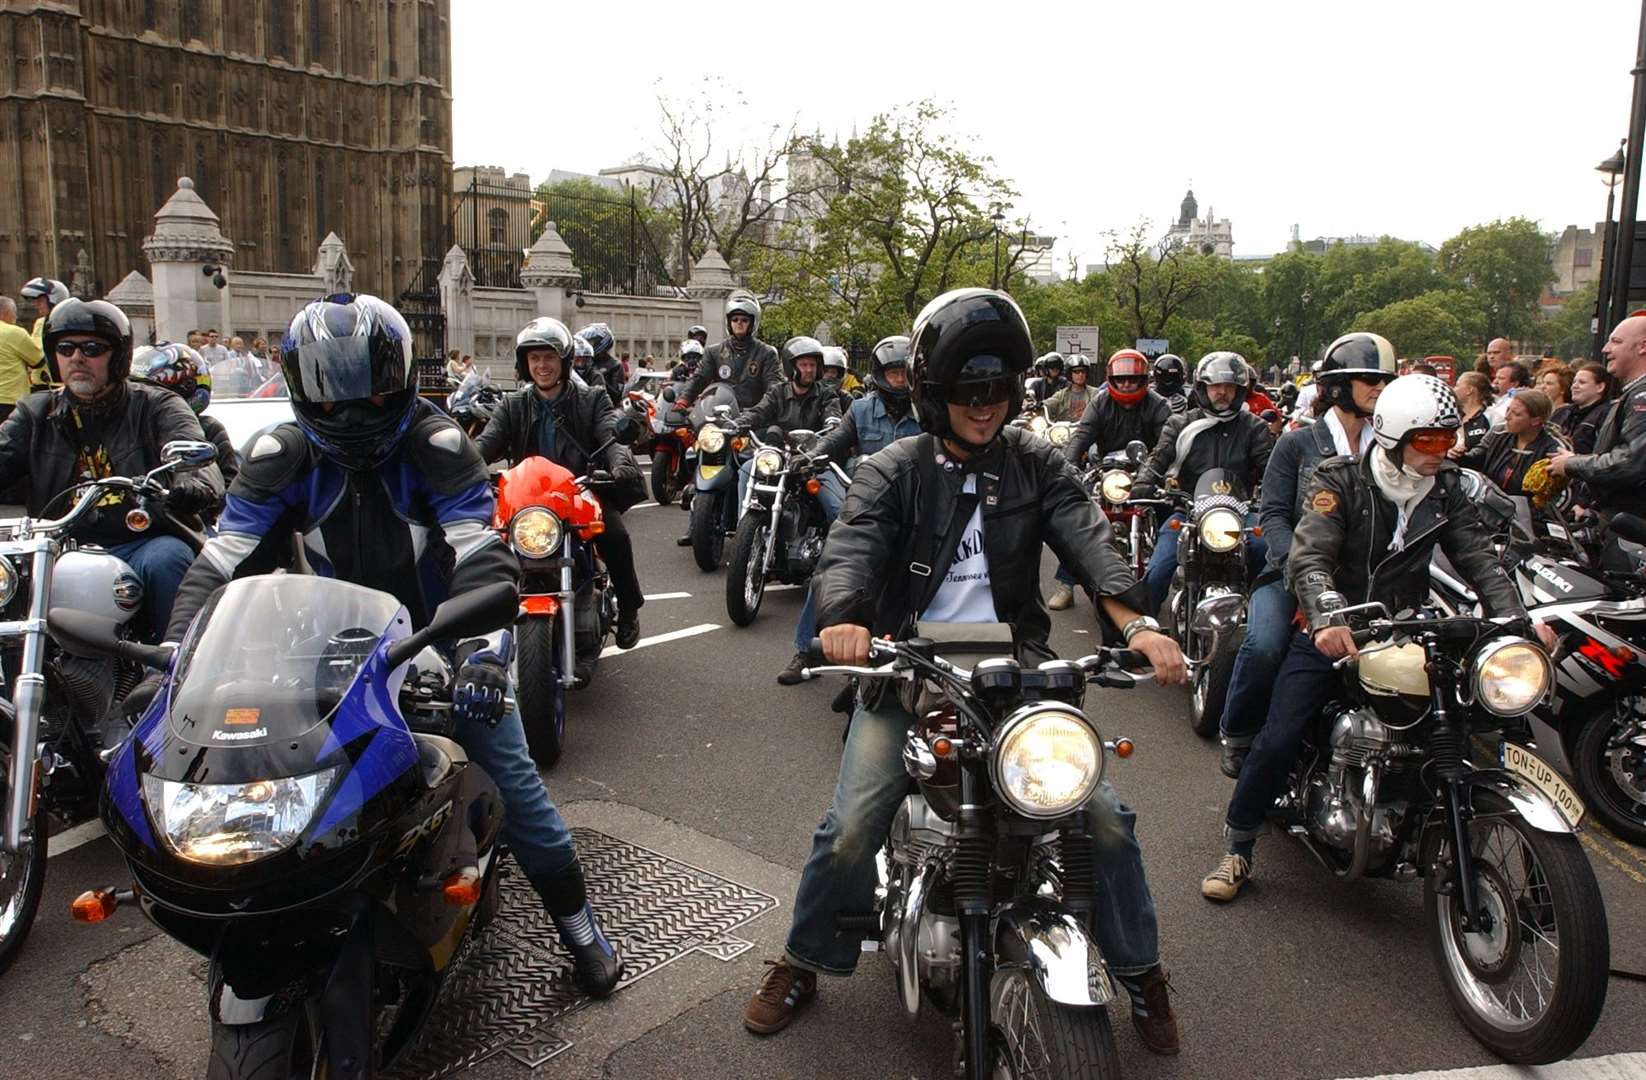 The Kill Spills protest in 2006, where 5000 bikers rode from The Ace Cafe to the House of Commons.